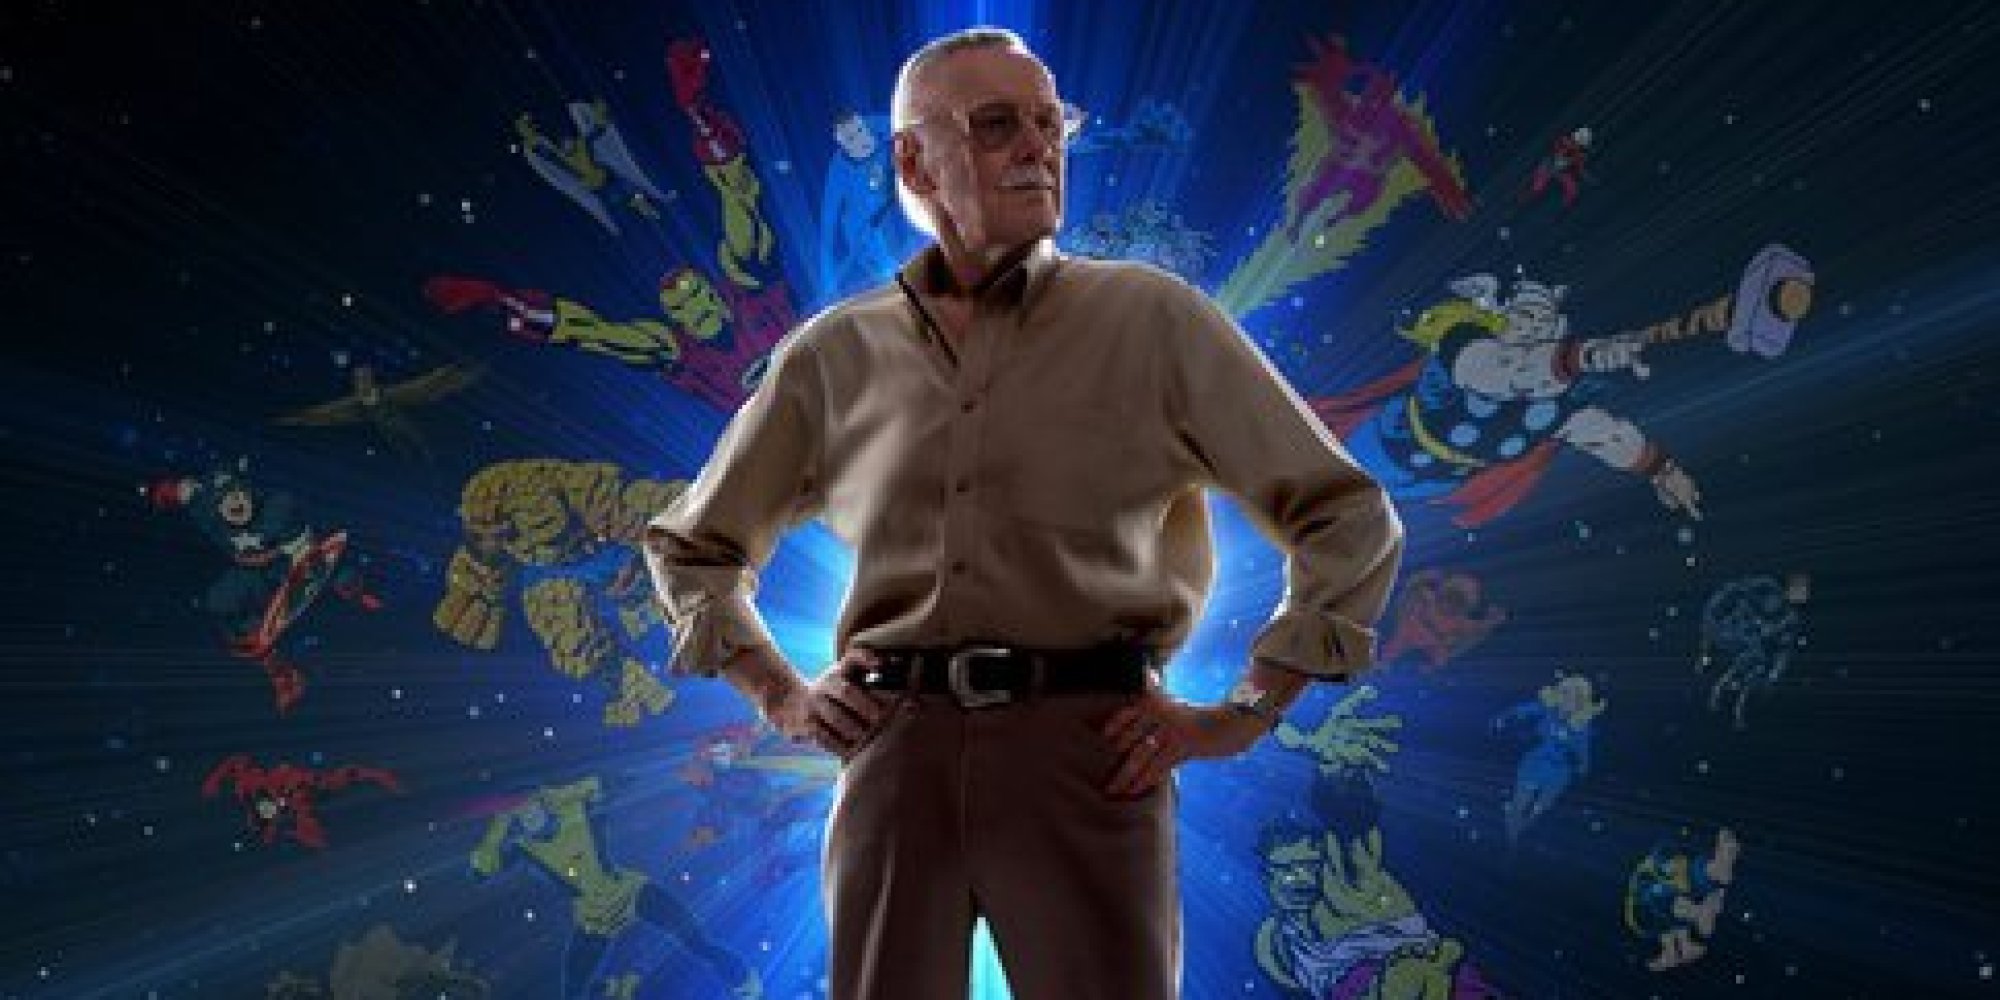 o-stan-lee-marvel-comics-with-great-power-facebook